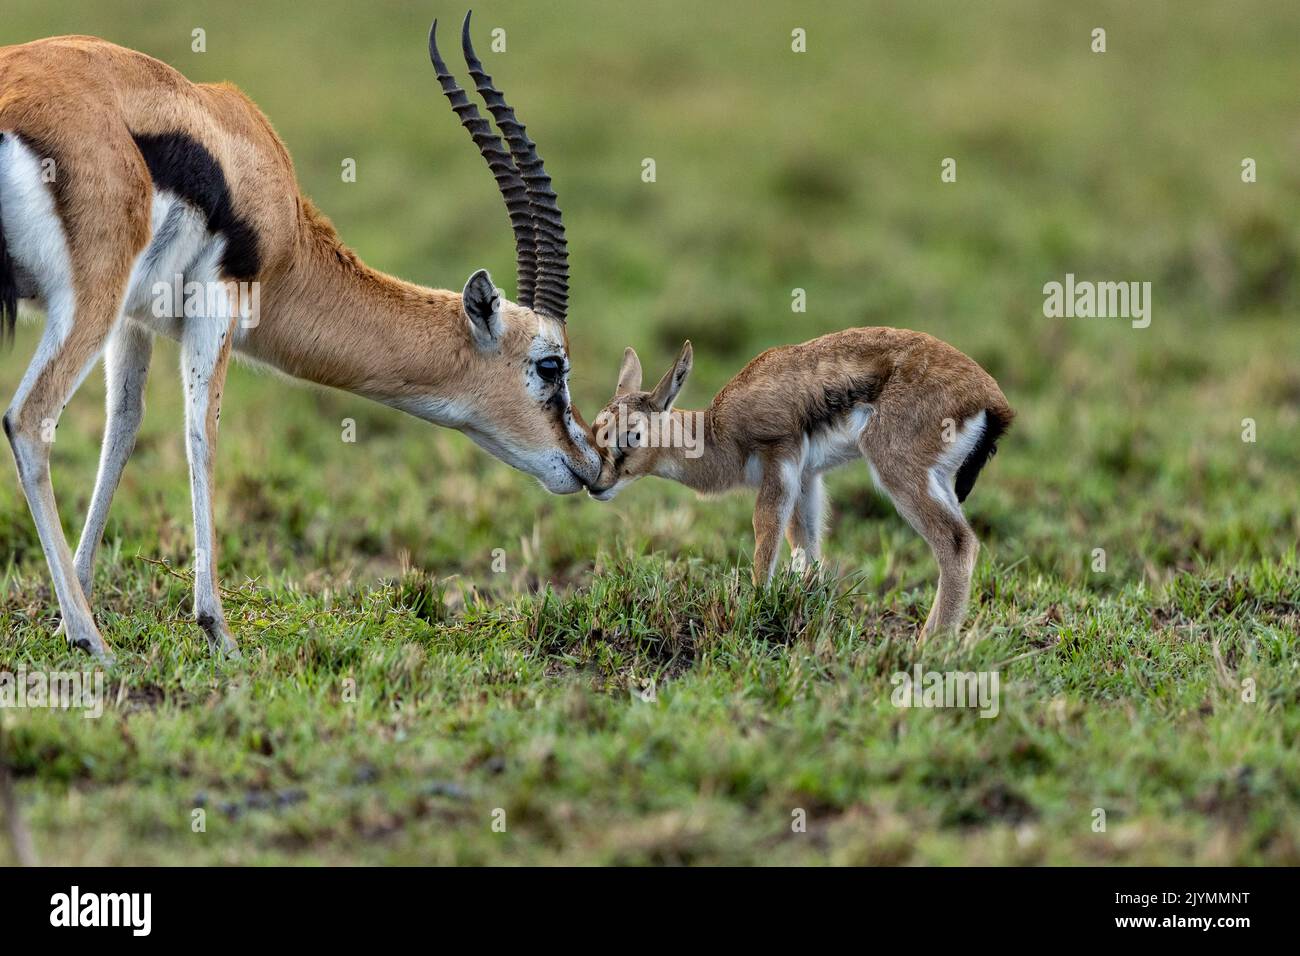 Thomson's Gazelle (Eudorcas thomsonii), in the savannah, An adult male comes to sniff a newborn, Masai Mara National Reserve, National Park, Kenya, East Africa, Africa Stock Photo